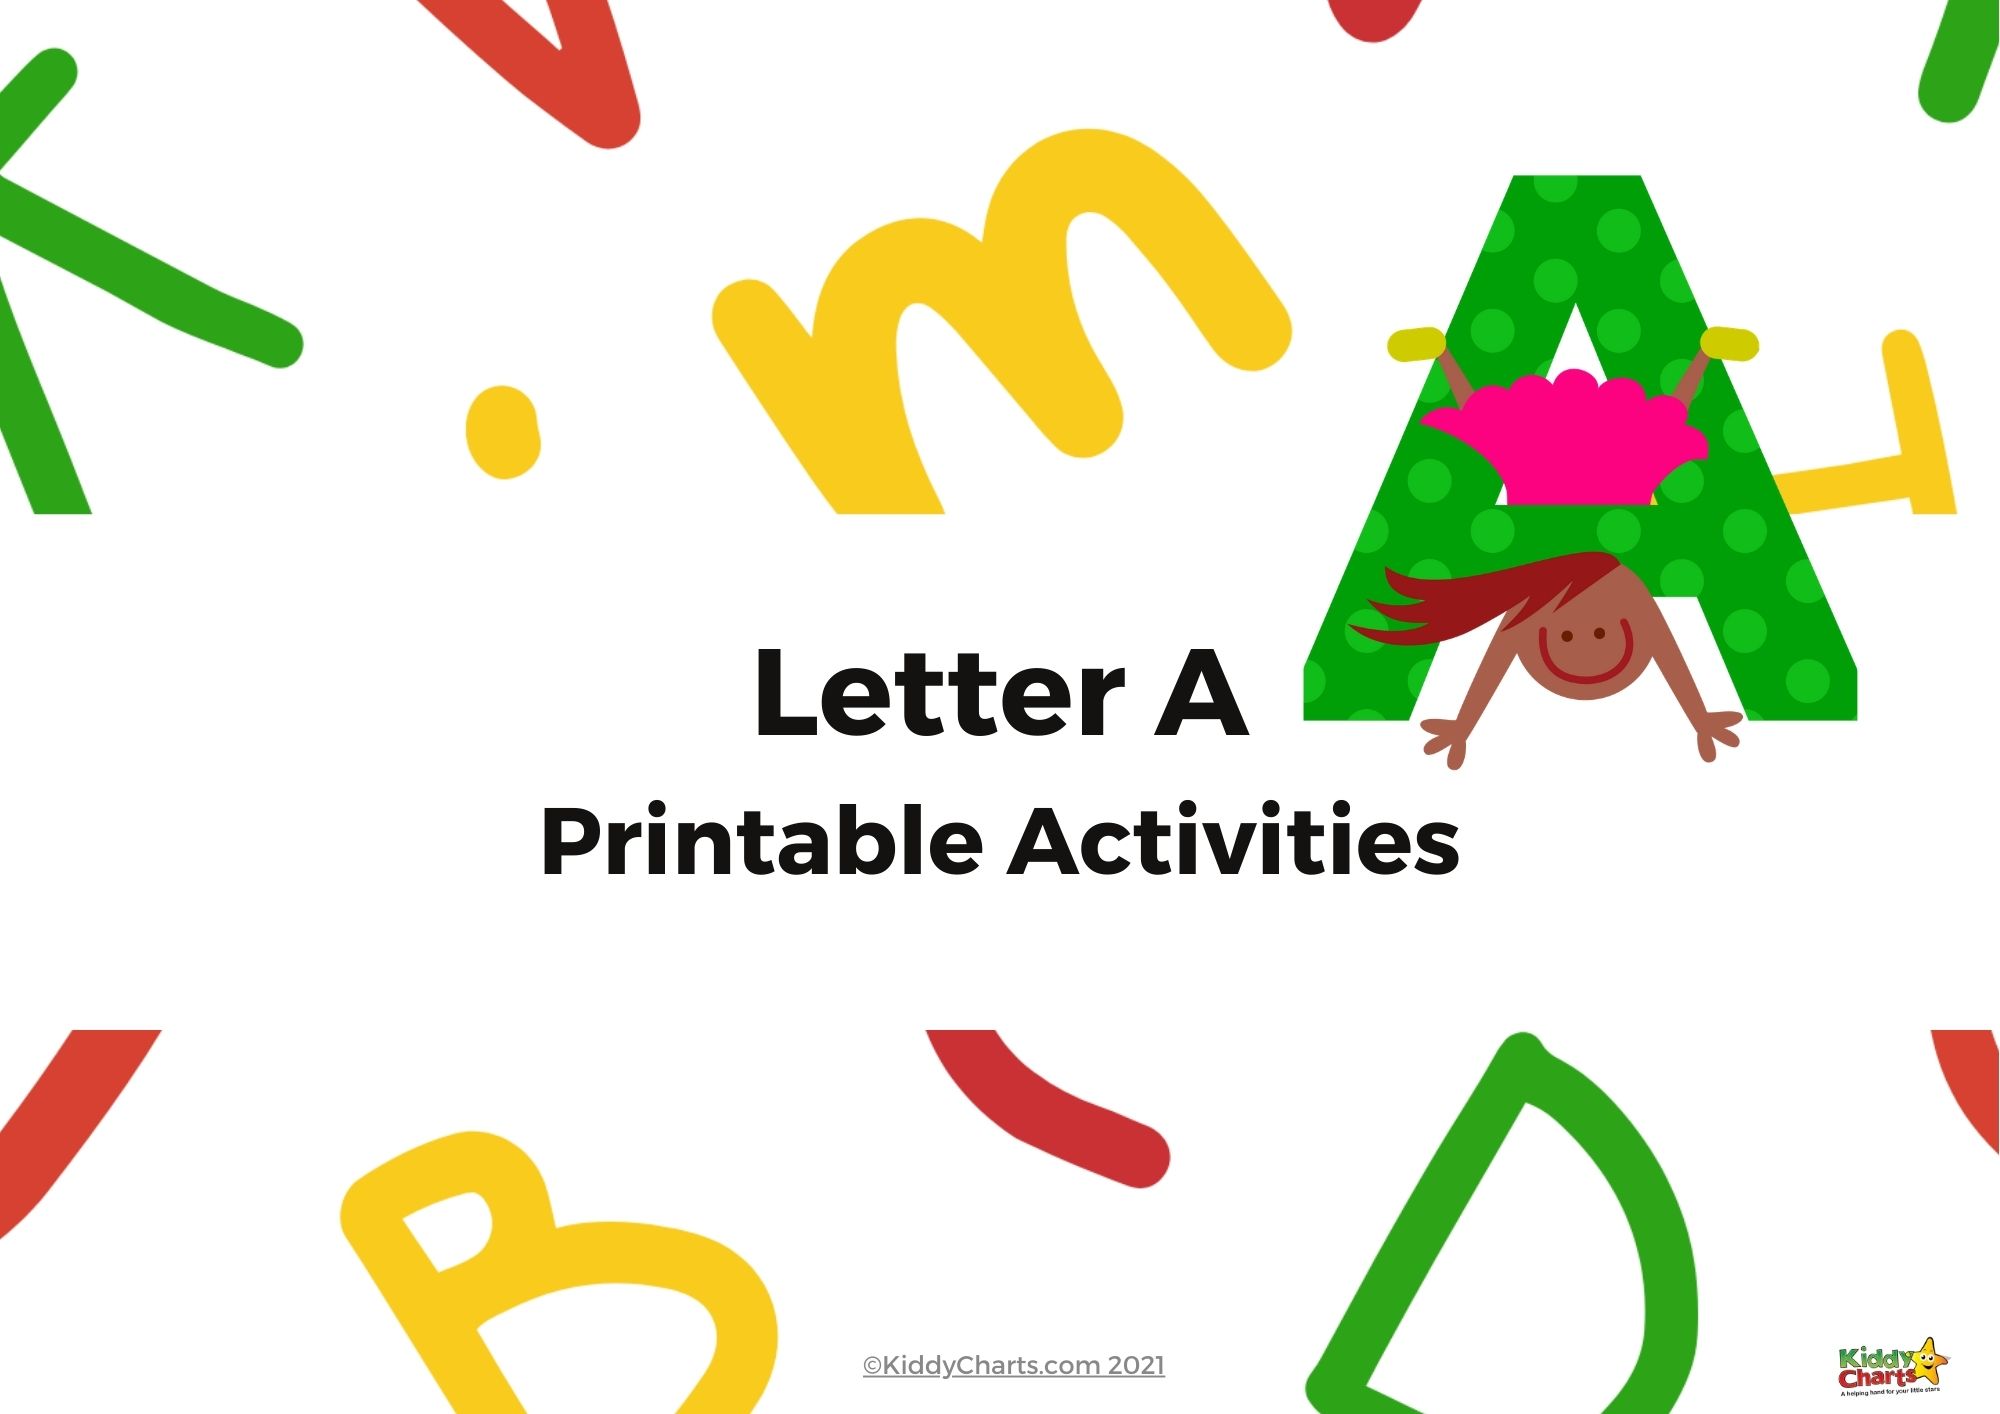 Letter A Printable activities: Letter A printable activities workbook ...